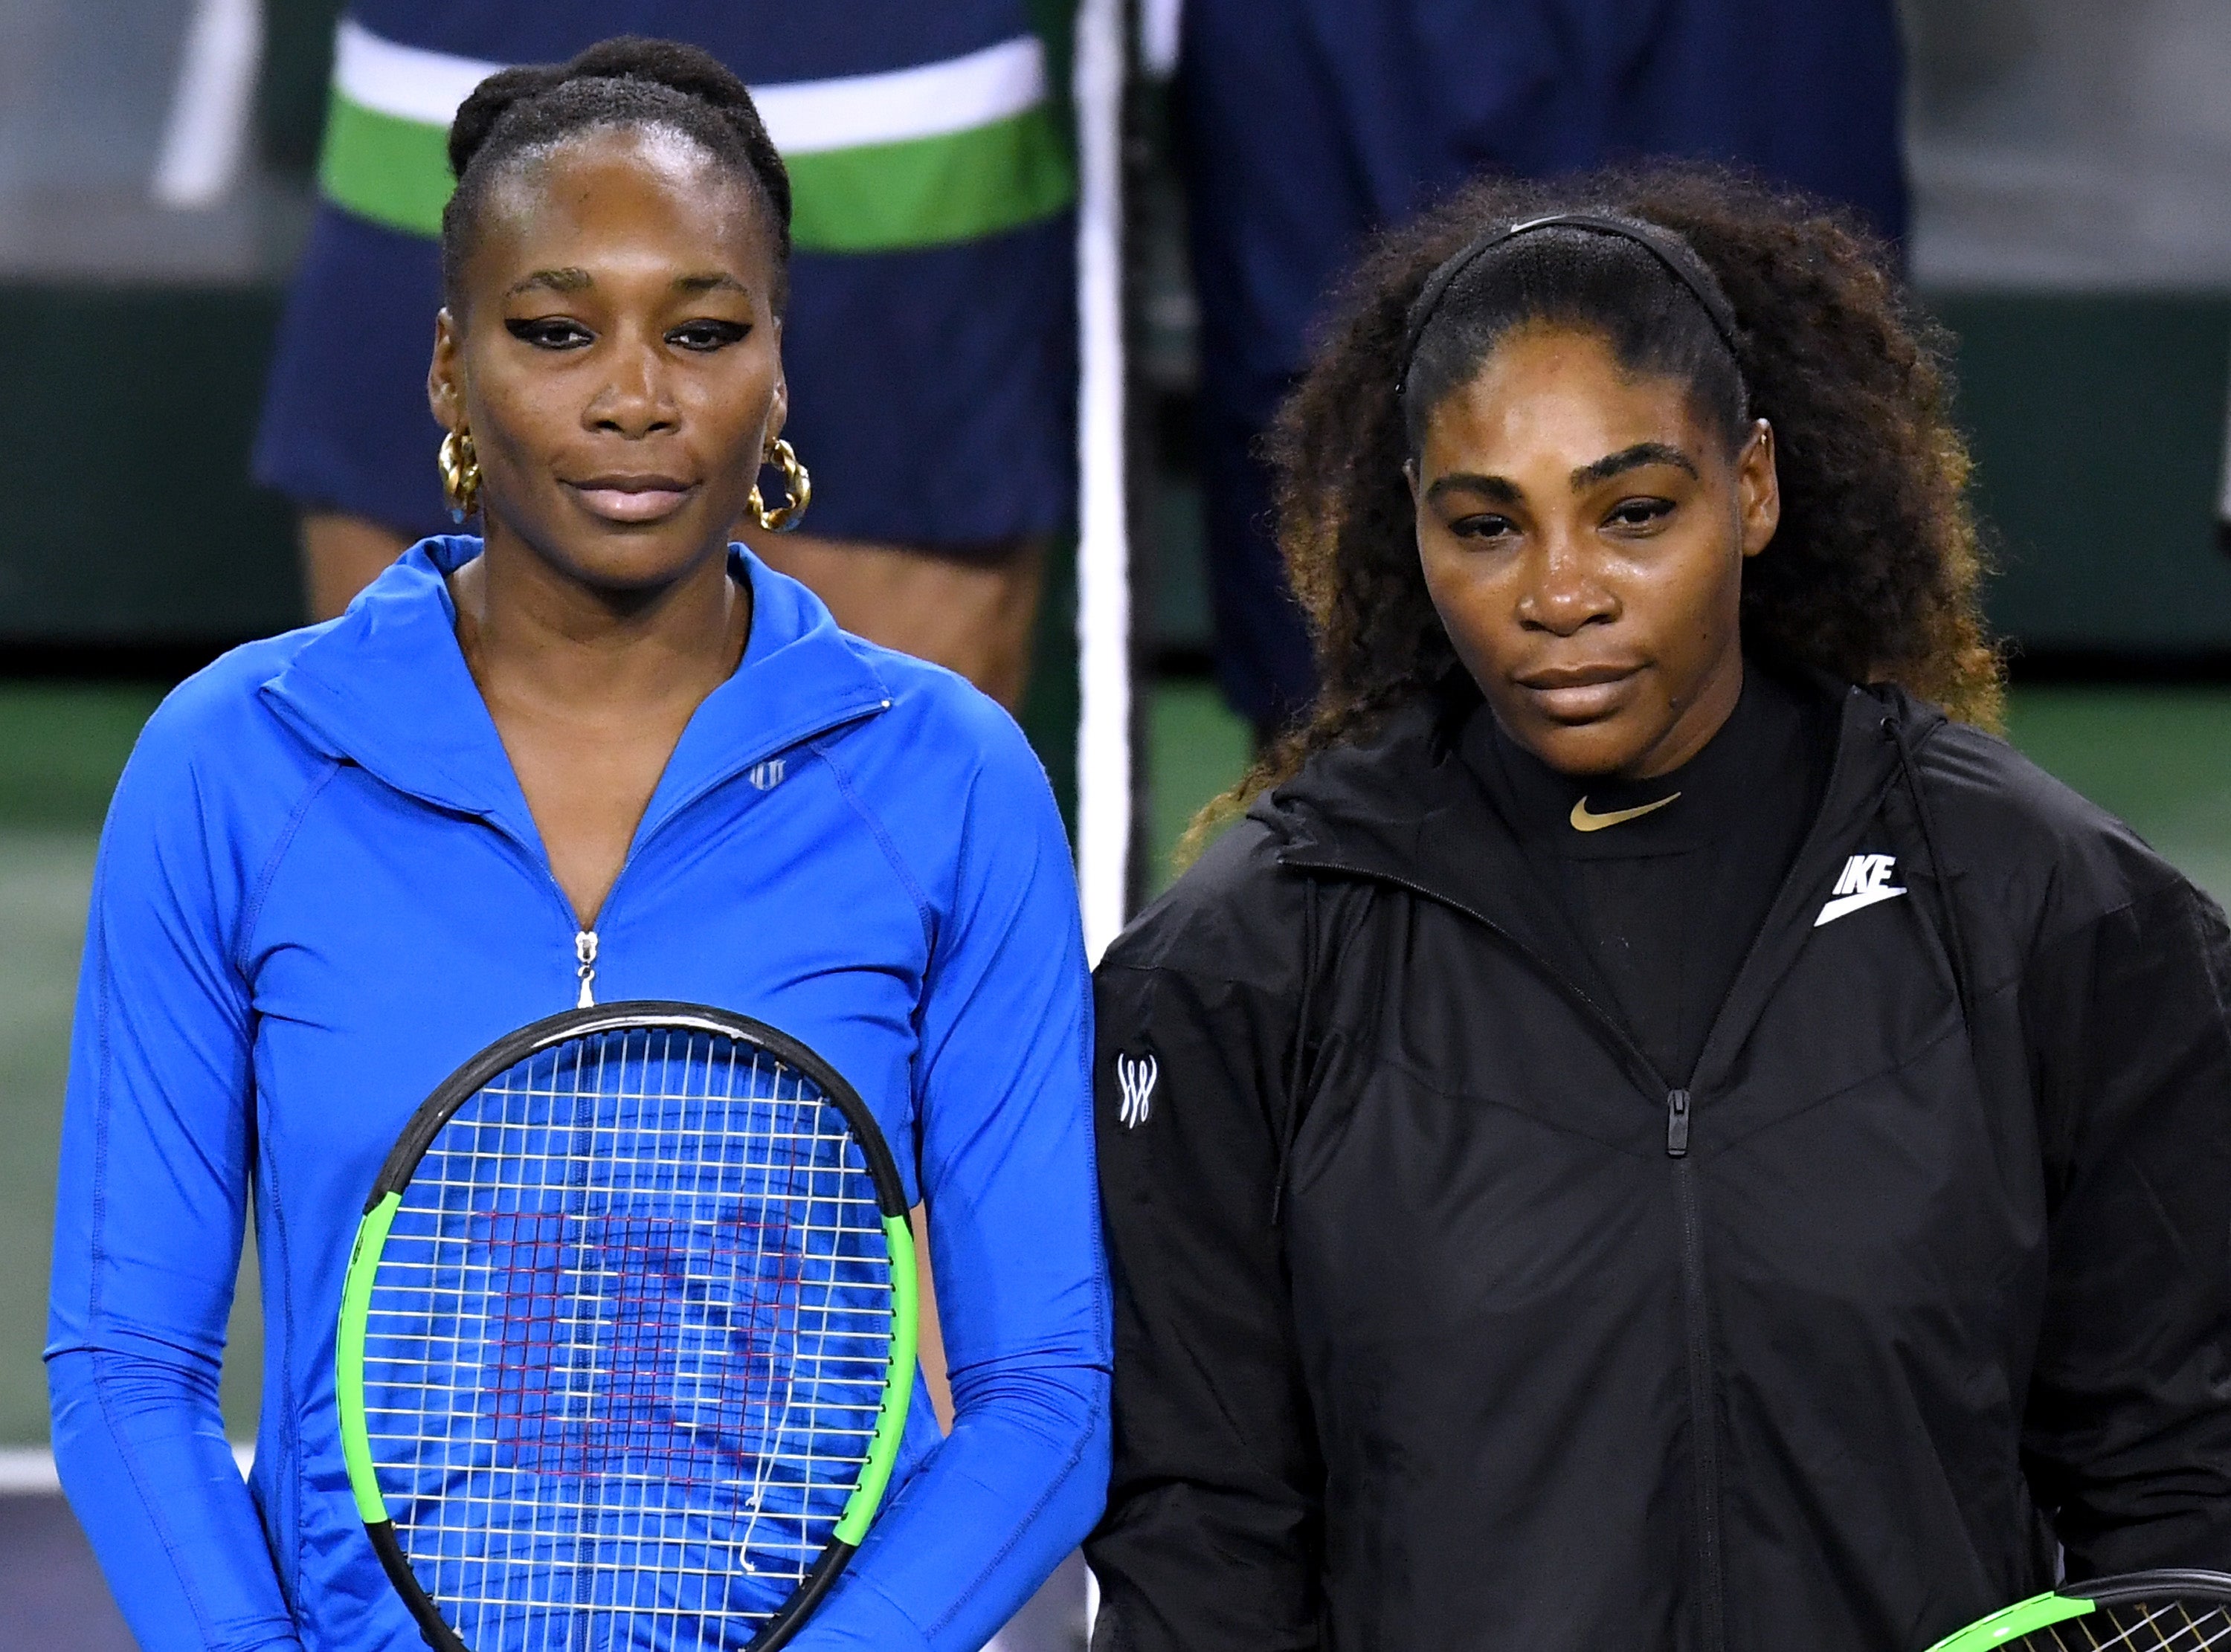 After Losing To Venus Williams At Indian Wells, Serena Williams Says She Still Has ‘A Long Way To Go’